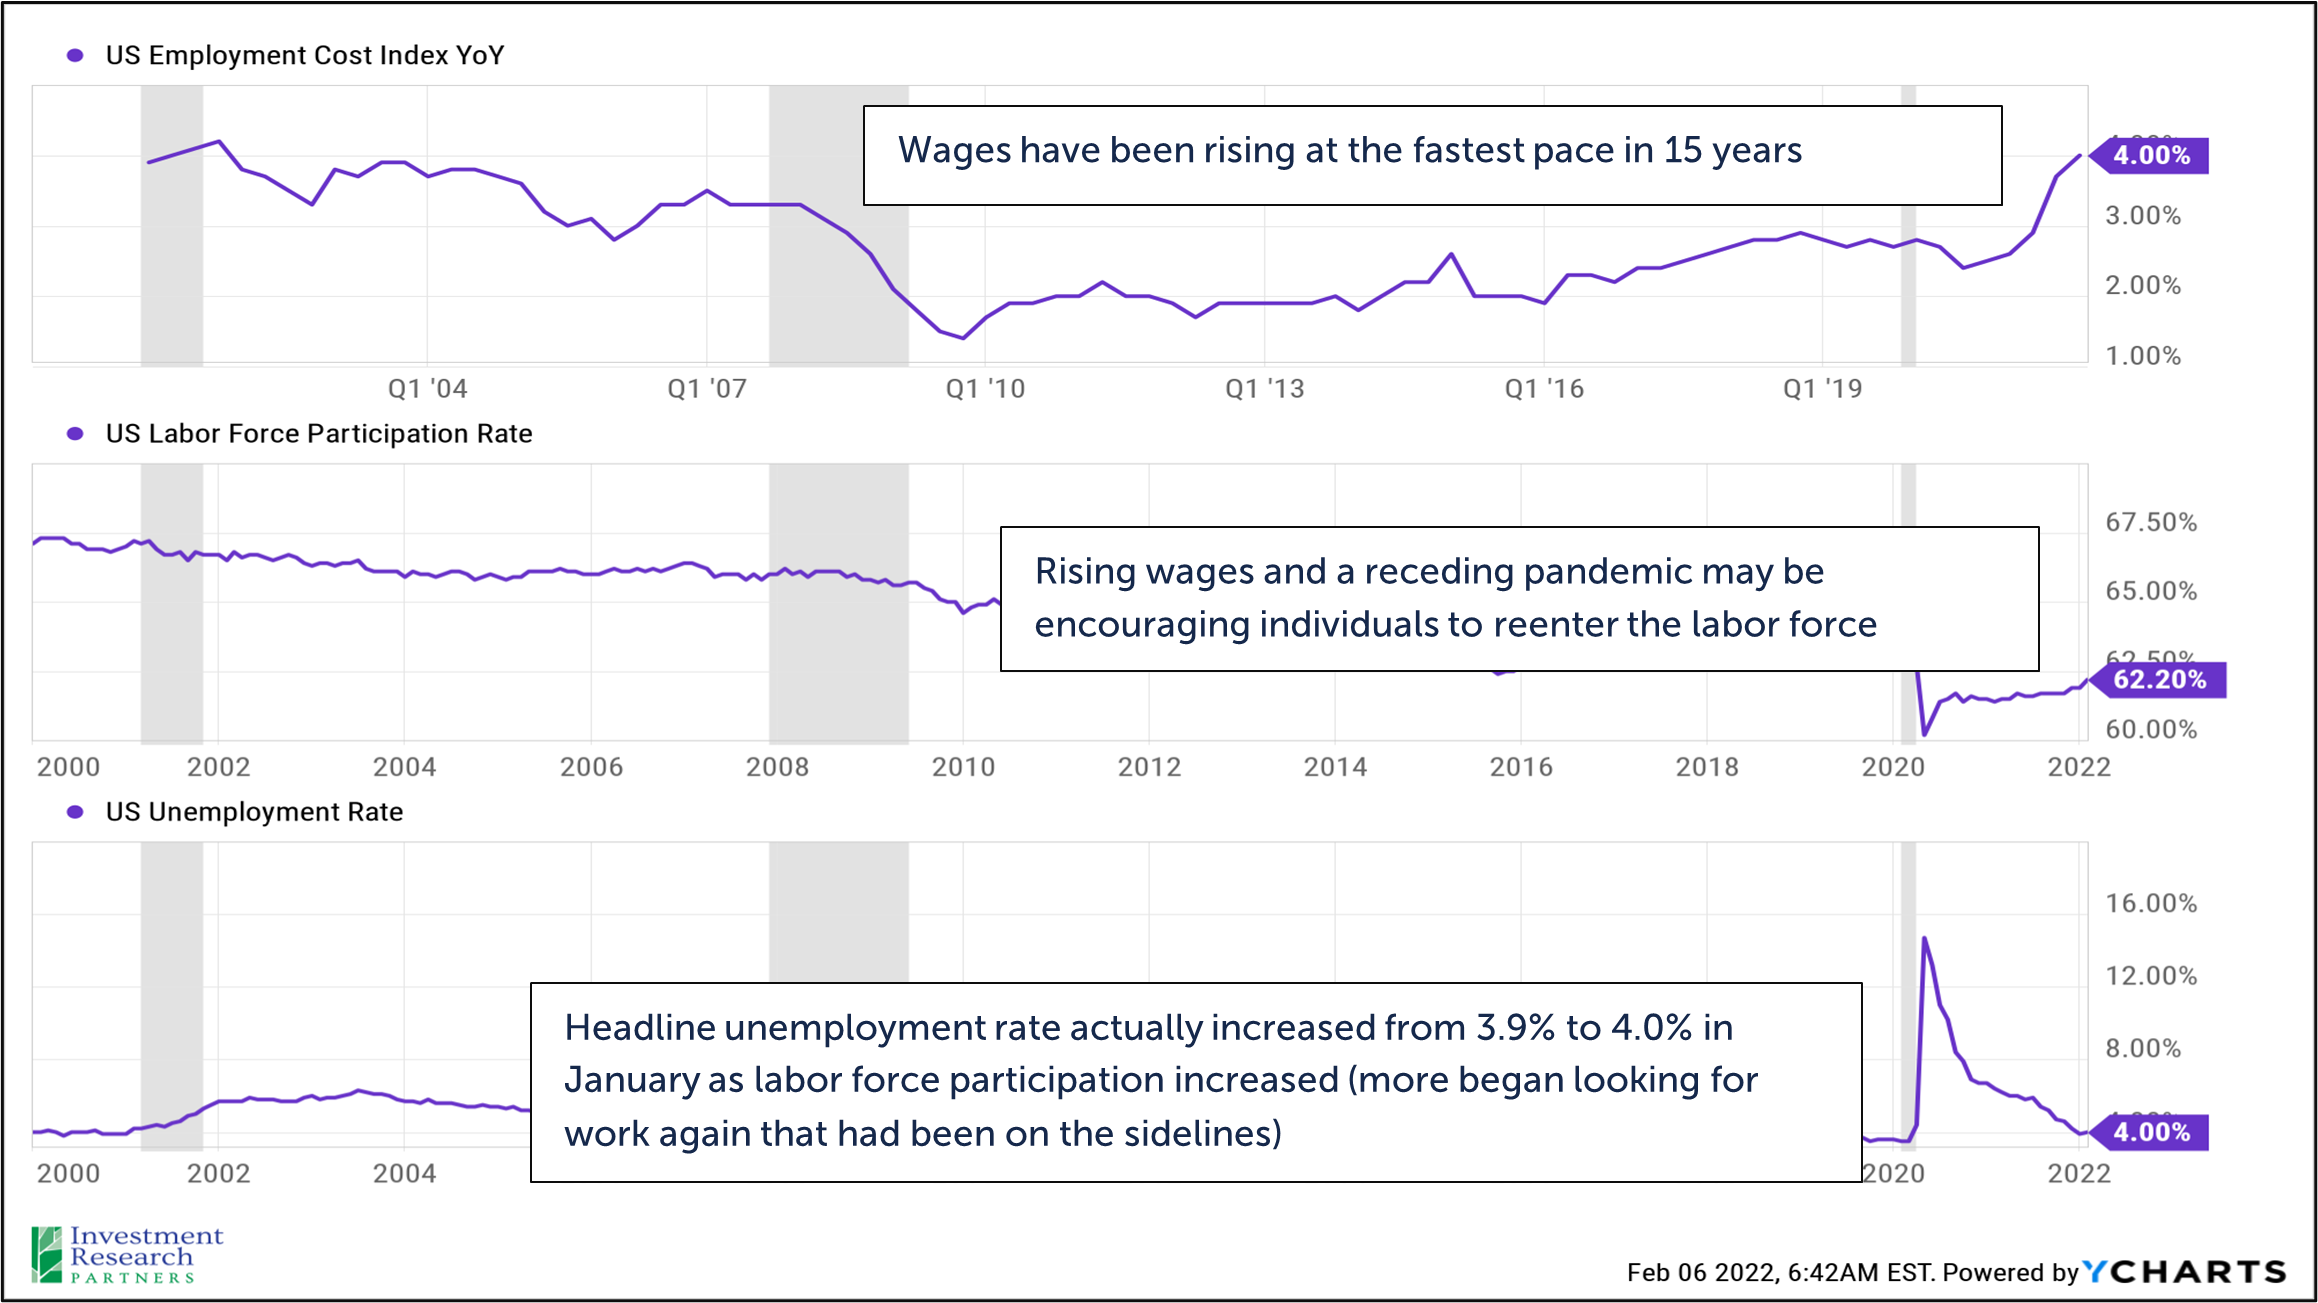 Line graphs depicting US Employment Cost Index YoY, US Labor Force Participation Rate, and US Unemployment Rate